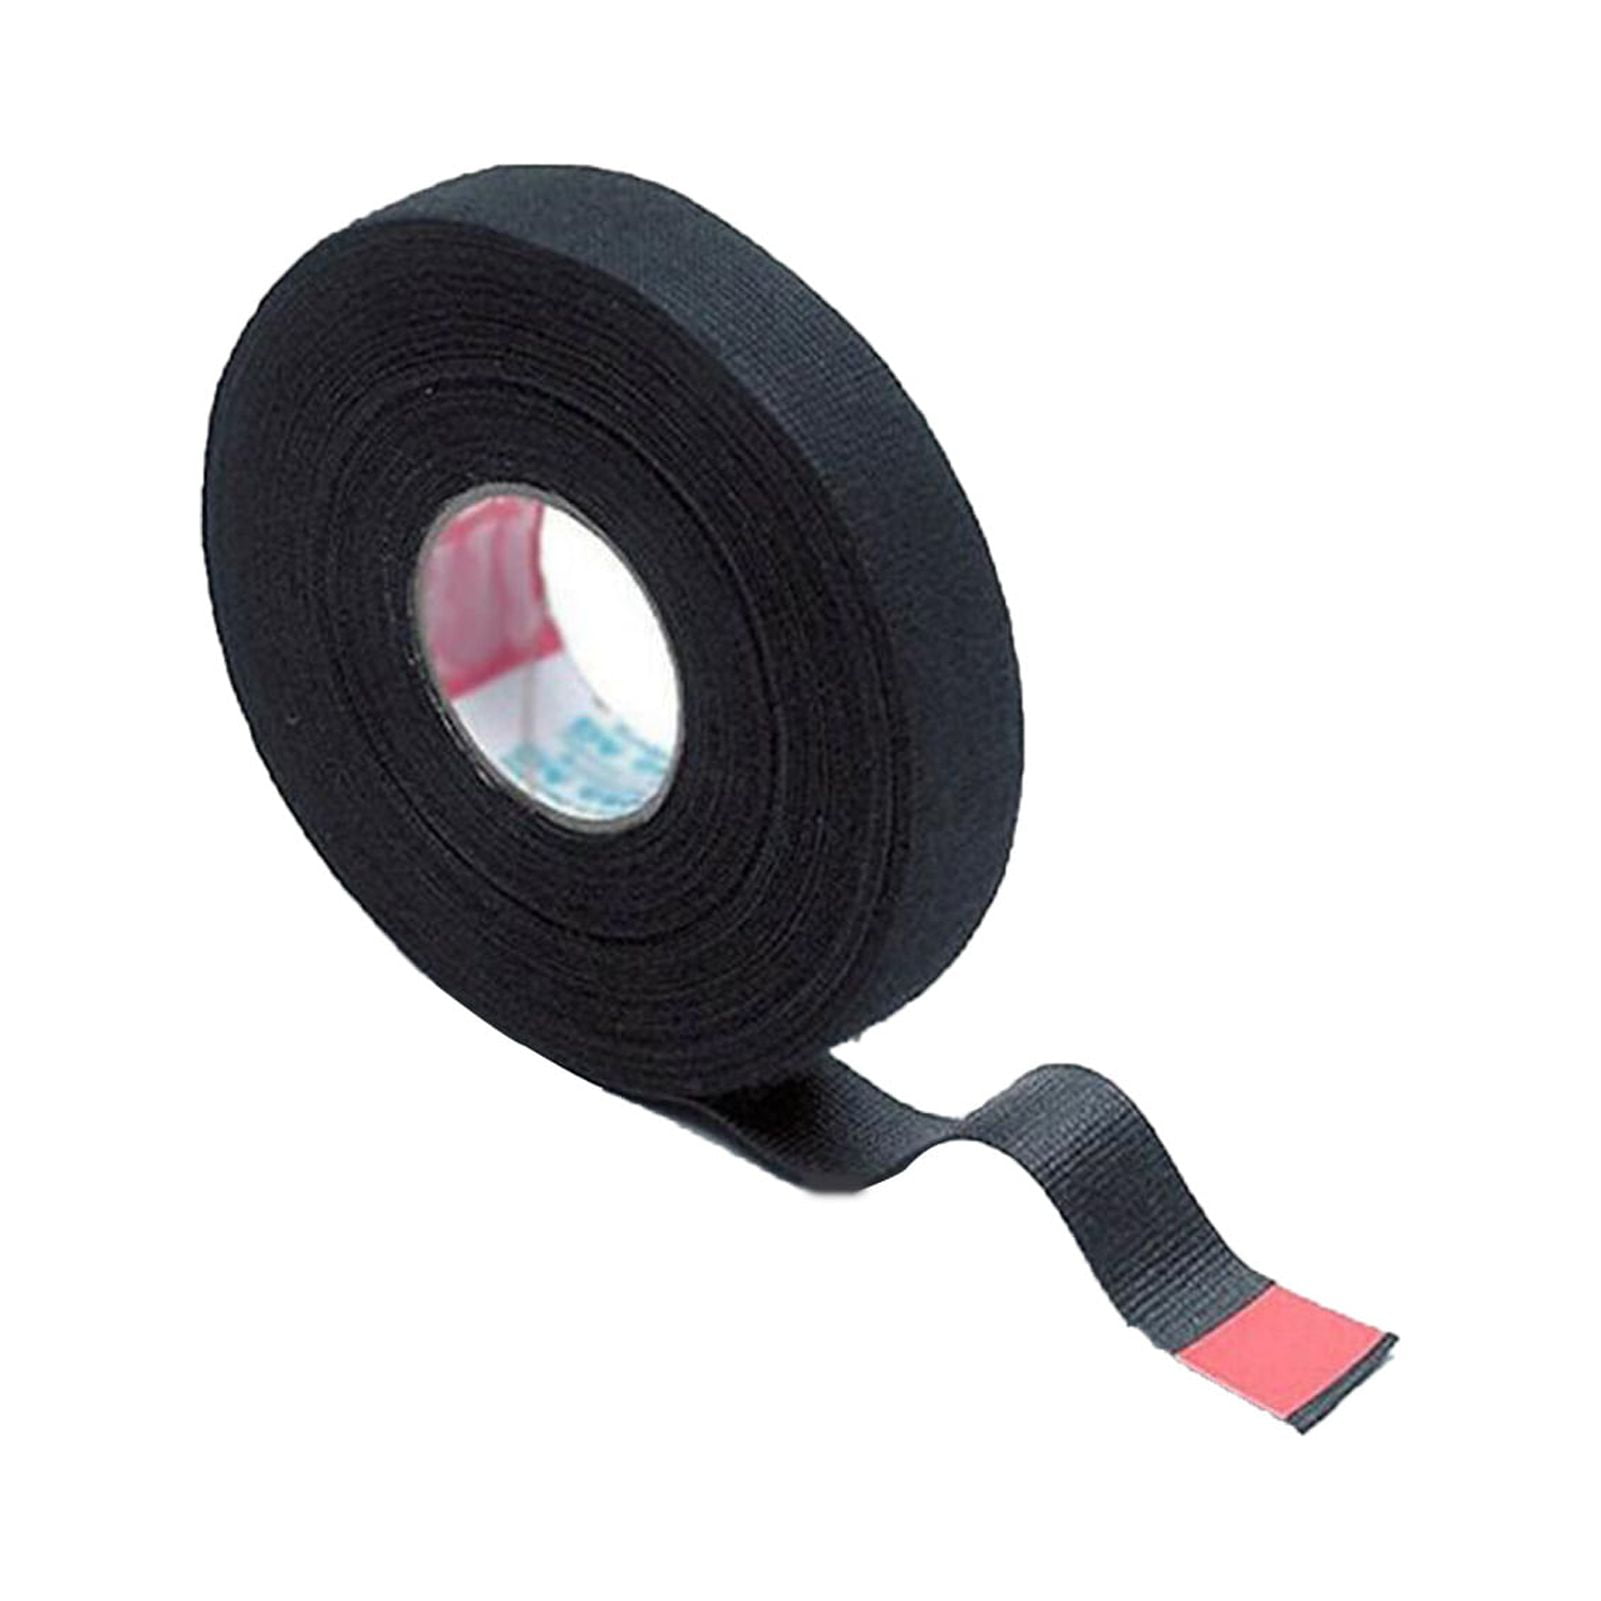 Uxcell Heat Resistant Tape High Temperature Heat Transfer Tape PTFE Film Adhesive Tape 0.98 inch Width 33ft Length Black